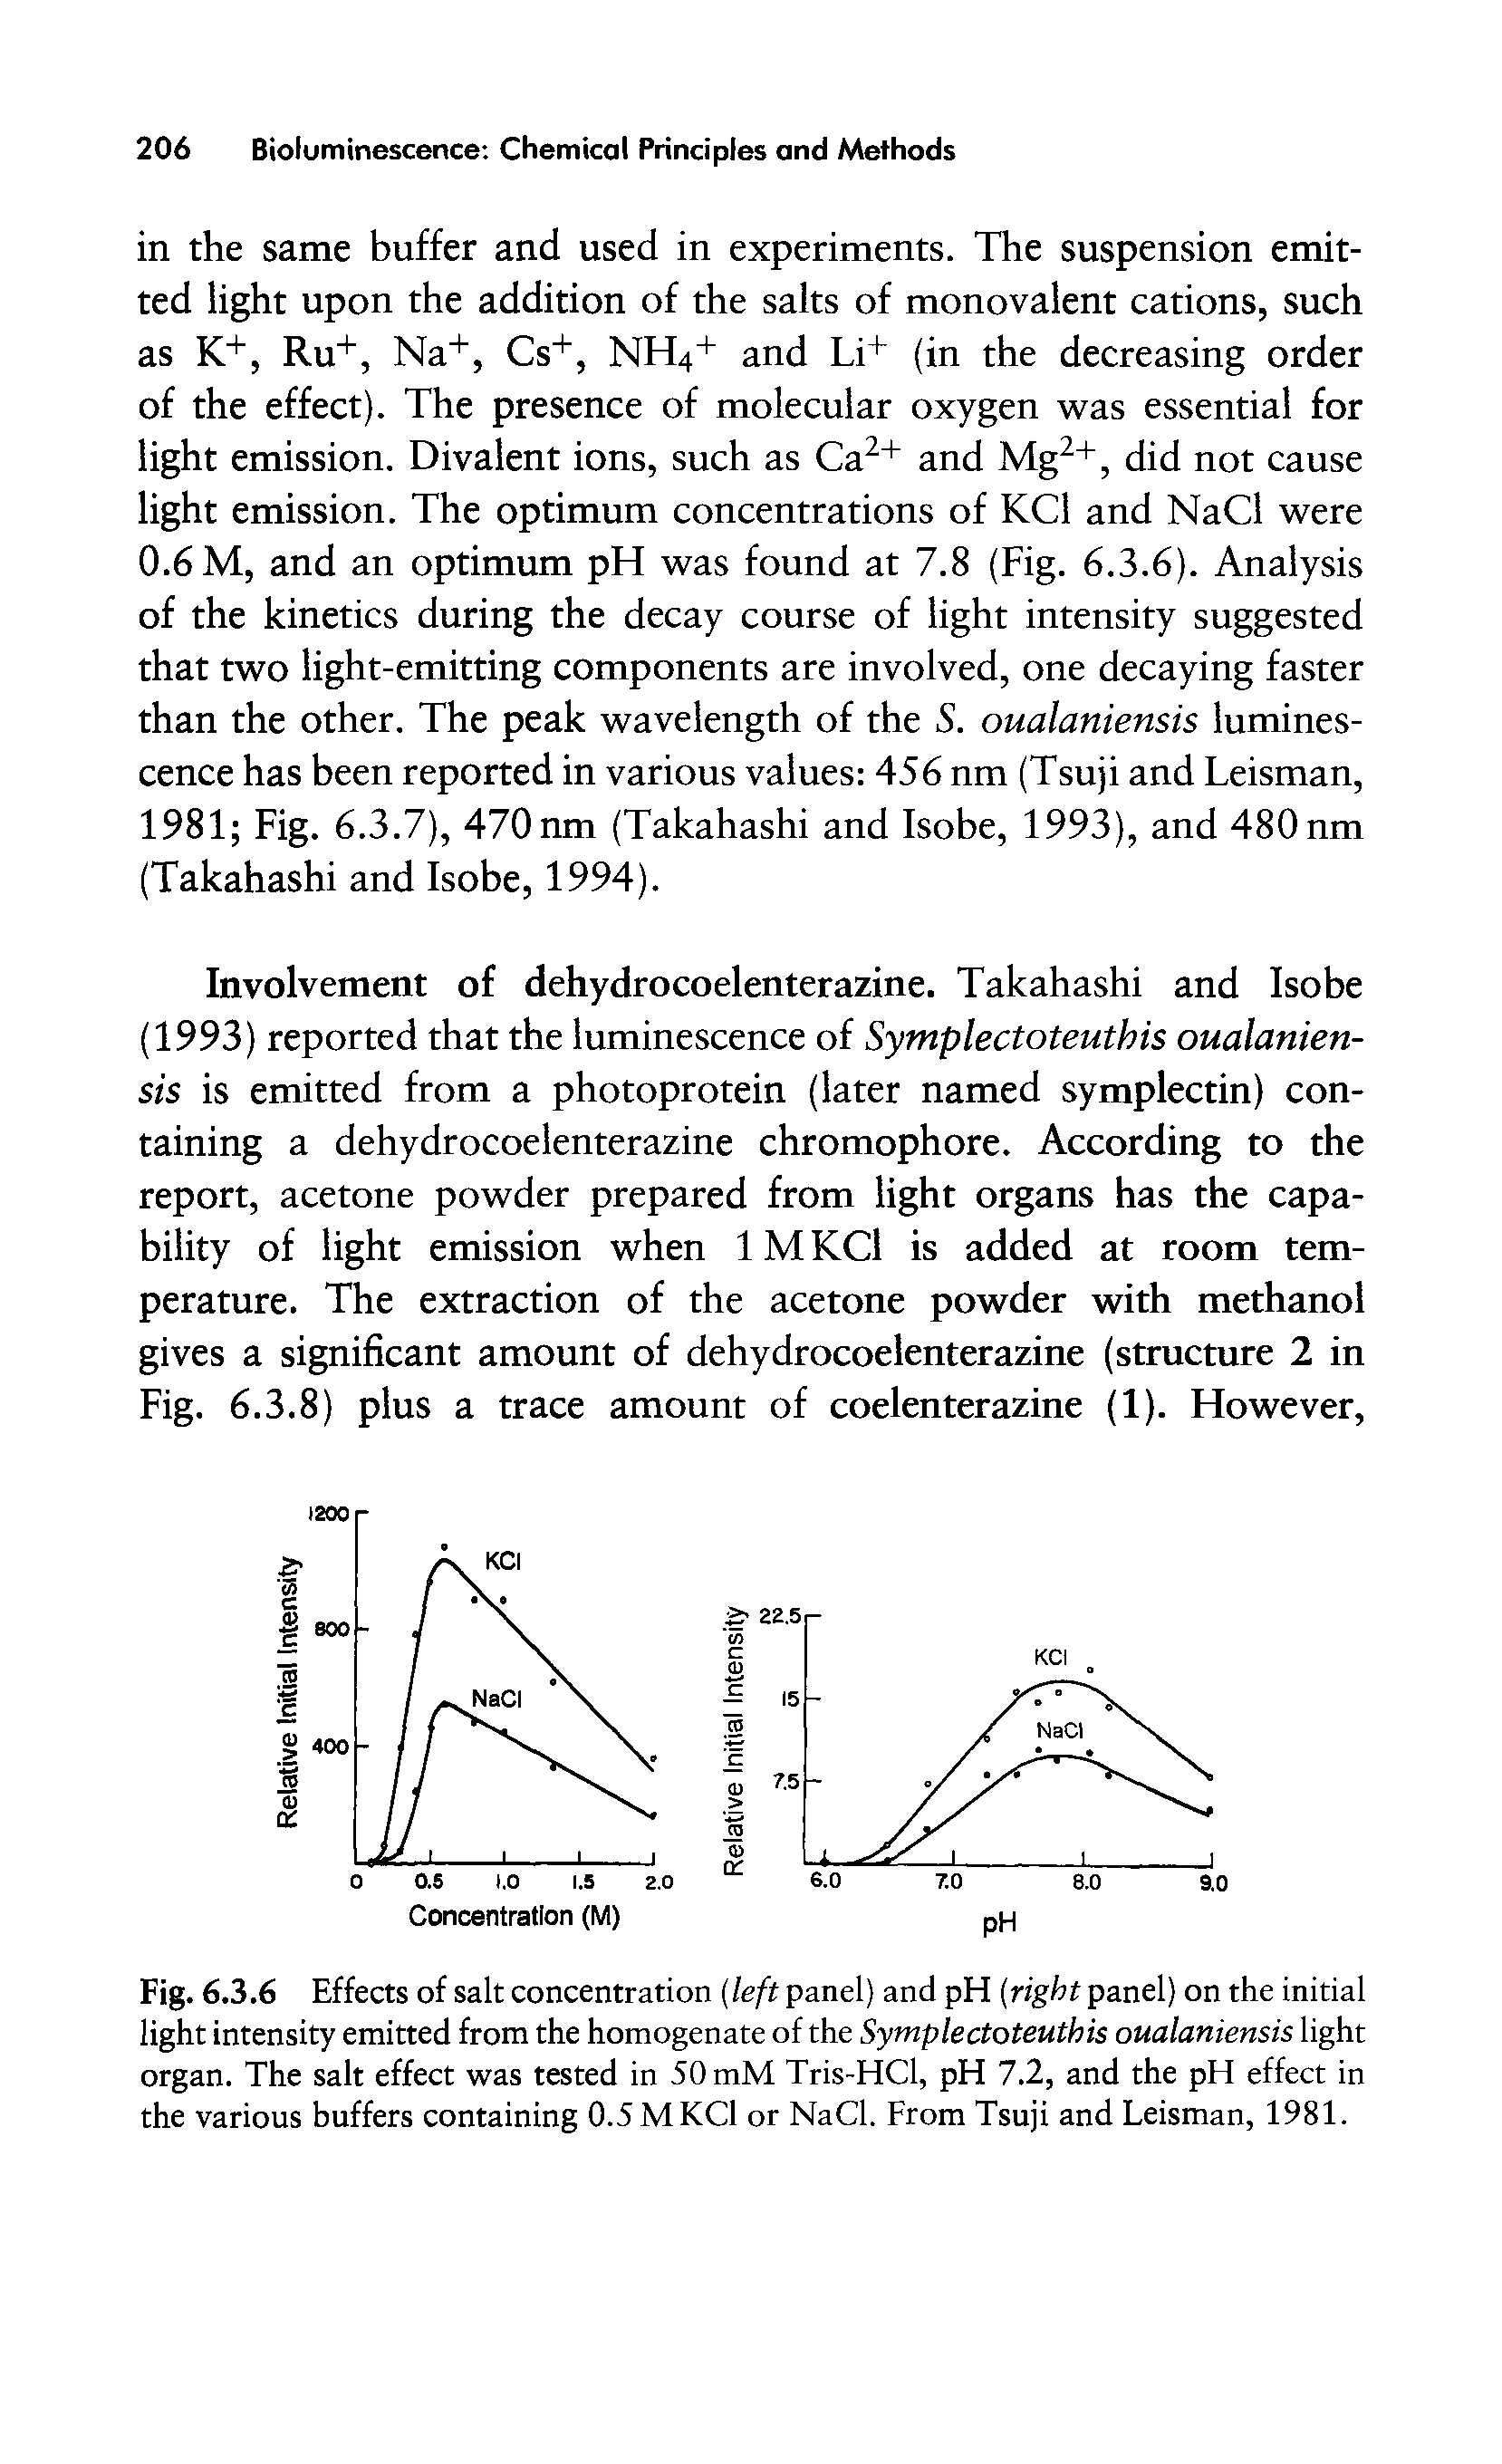 Fig. 6.3.6 Effects of salt concentration (left panel) and pH (right panel) on the initial light intensity emitted from the homogenate of the Symplectoteuthis oualaniensis light organ. The salt effect was tested in 50 mM Tris-HCl, pH 7.2, and the pH effect in the various buffers containing 0.5MKC1 or NaCl. From Tsuji and Leisman, 1981.